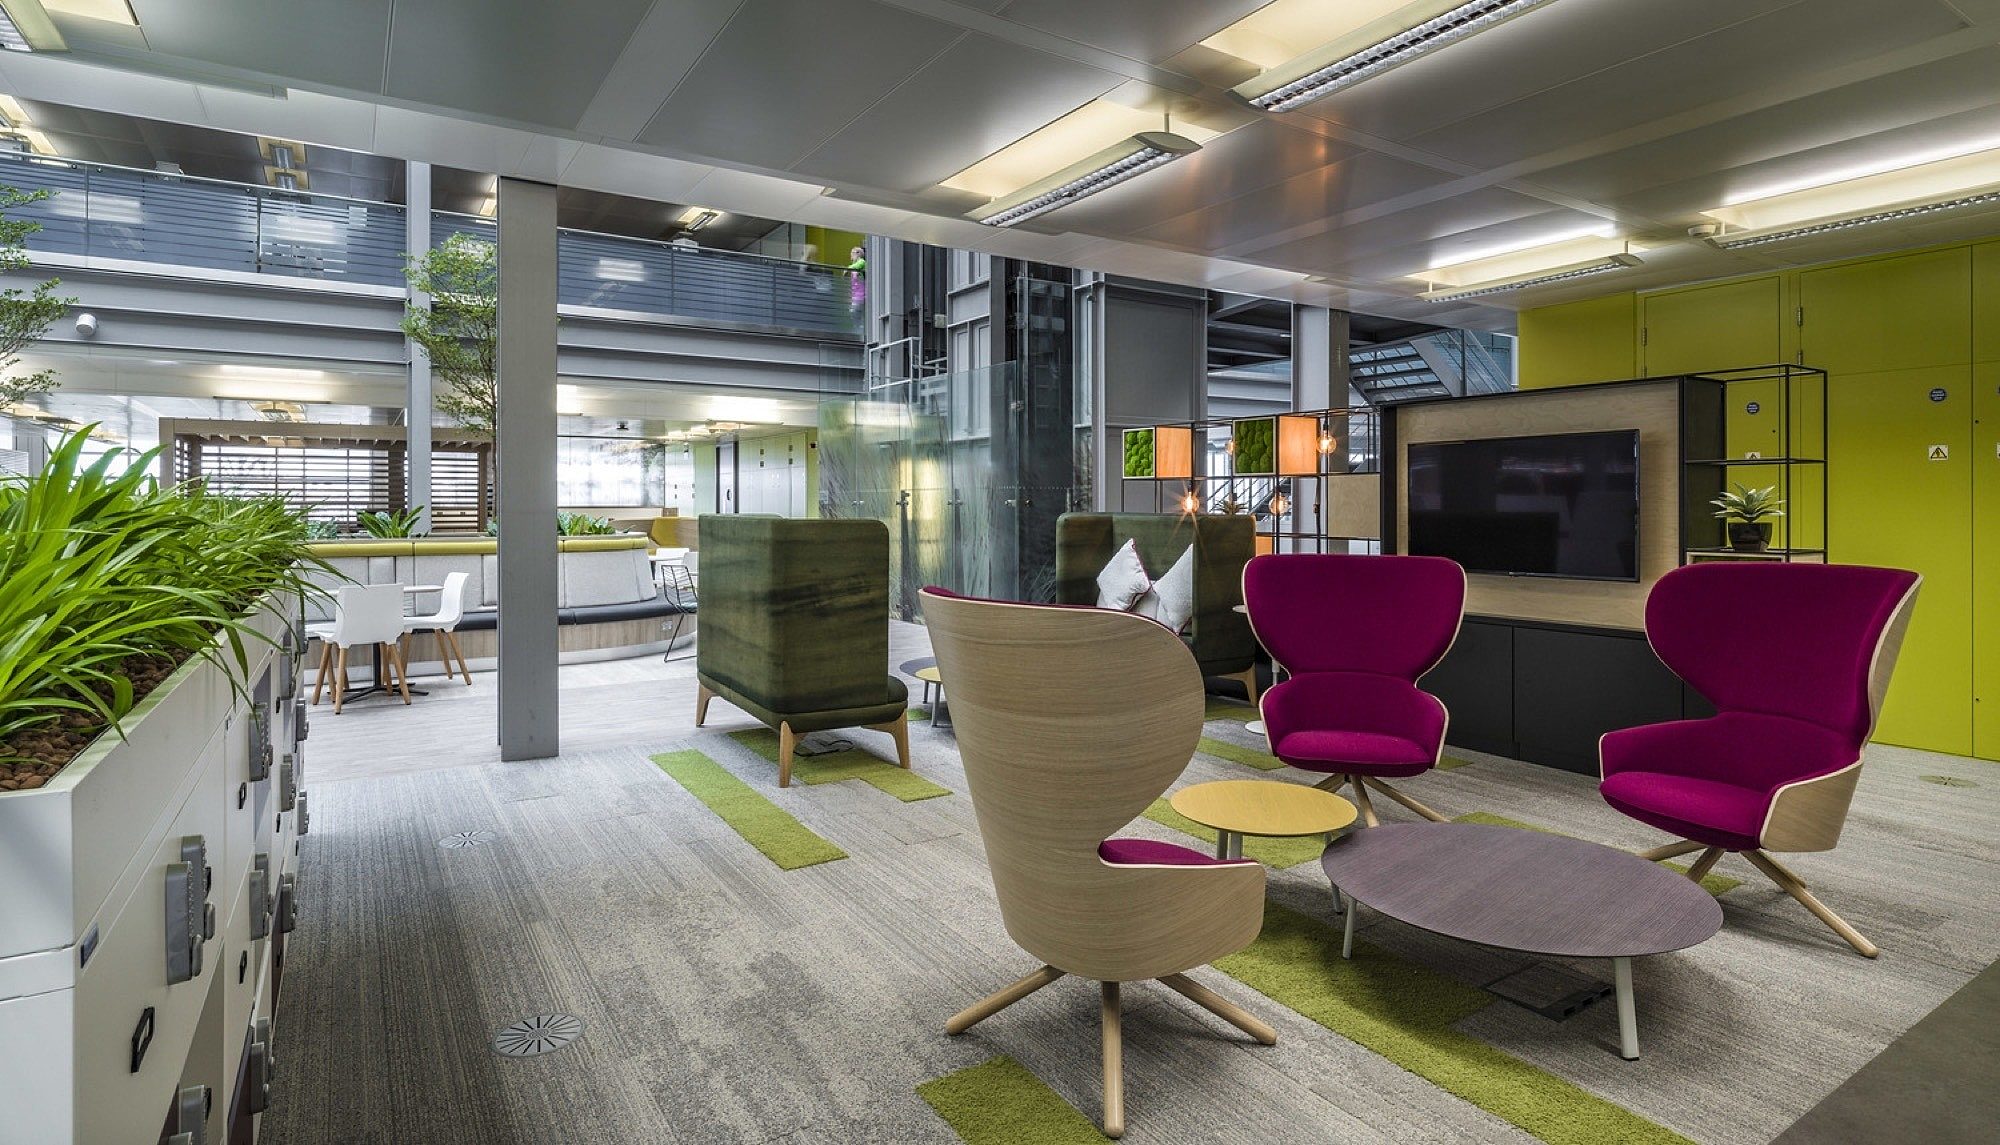 HMRC breakout area fit out